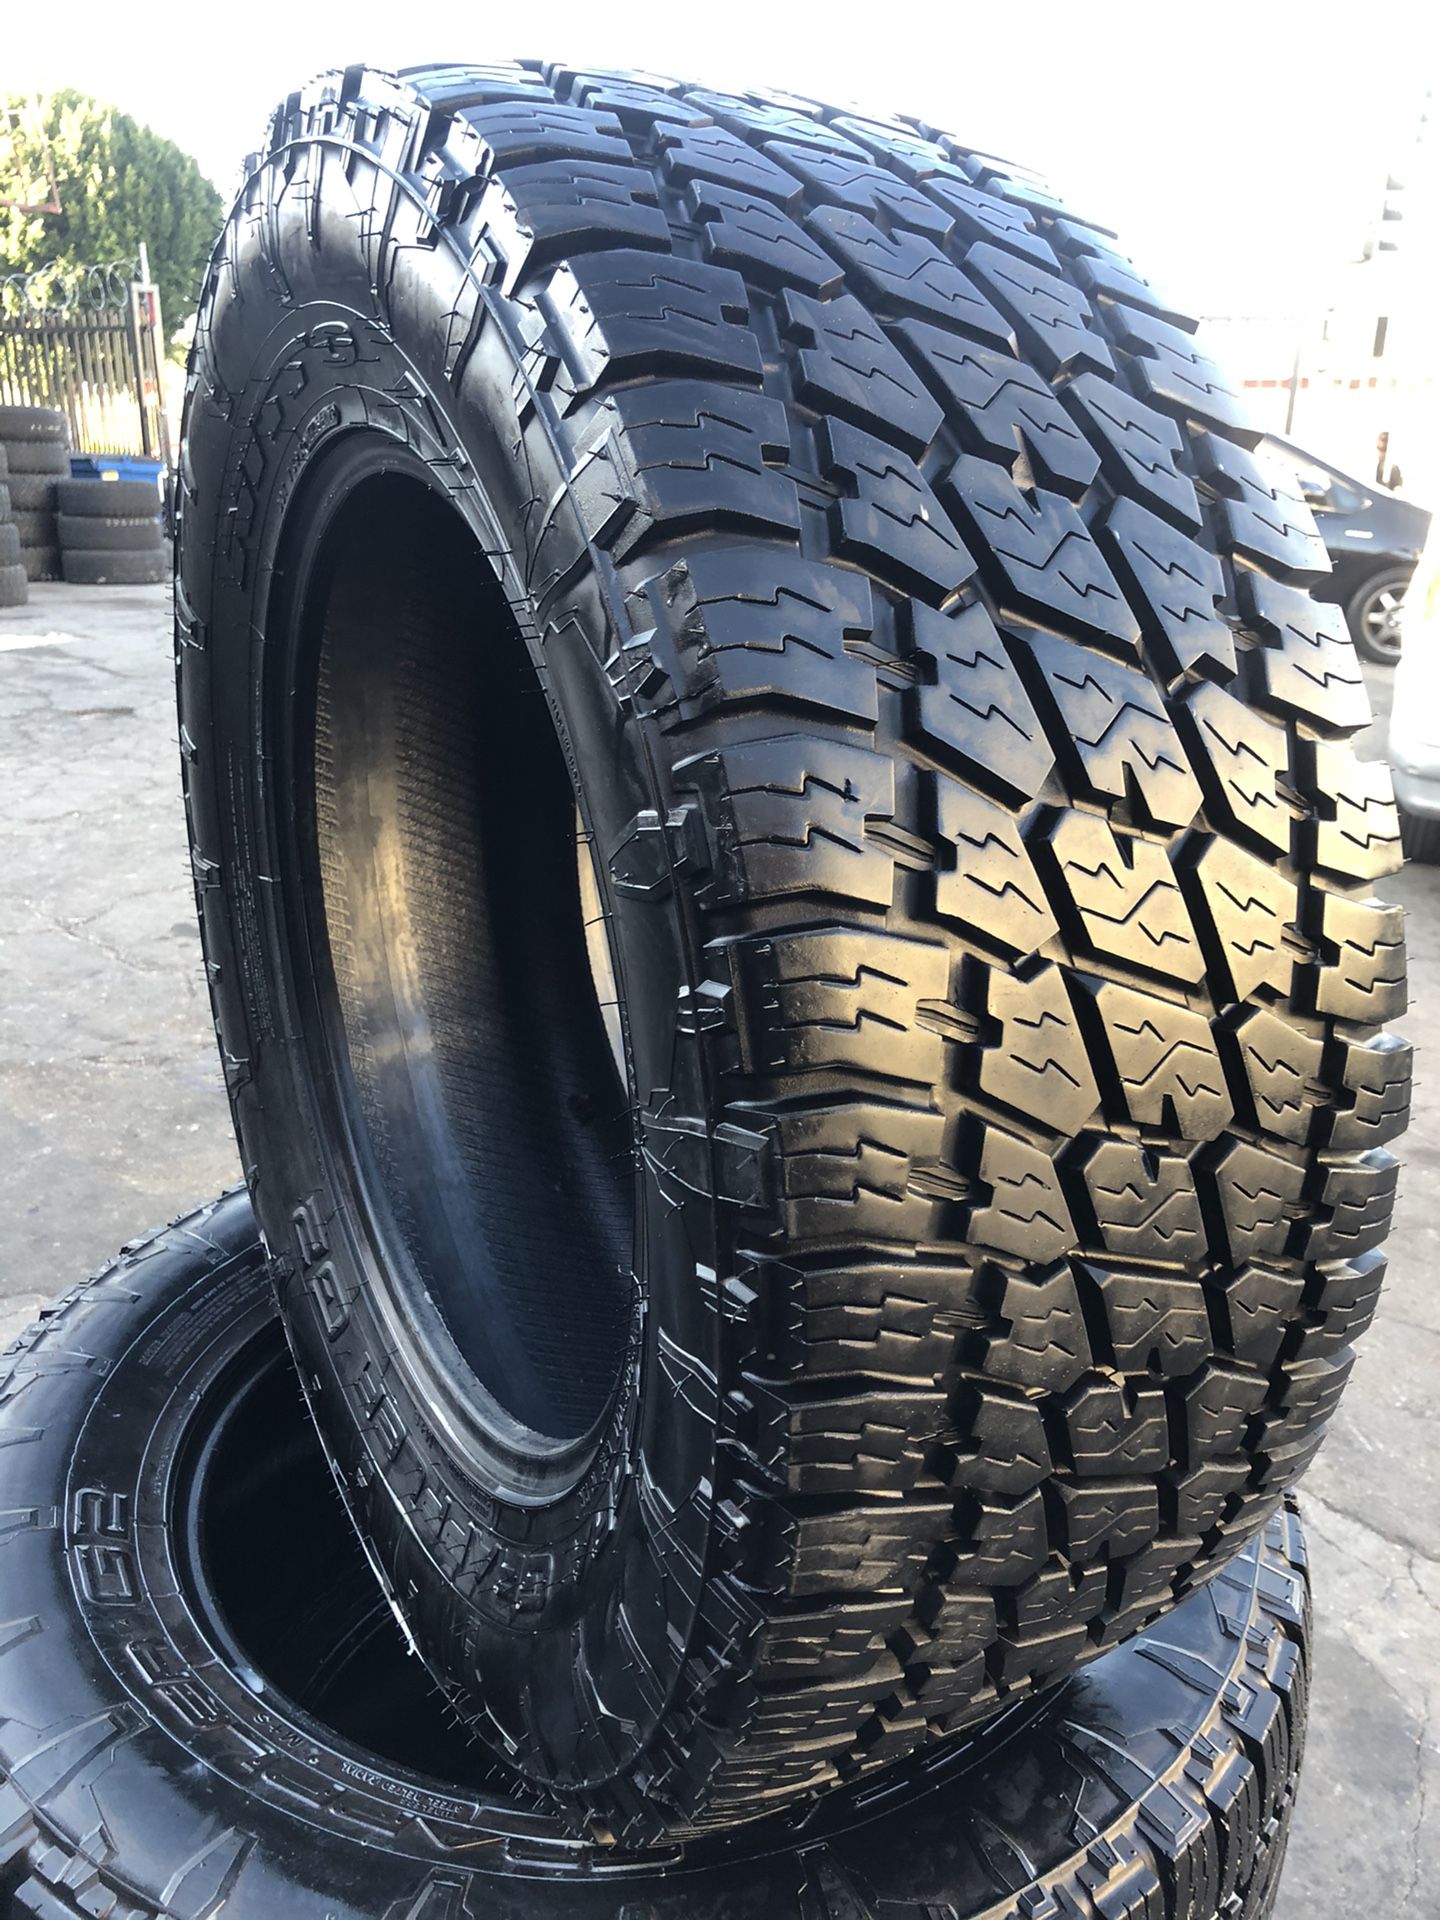 Nitto 35/12.50R20 All Terrain tires (4 for $340)